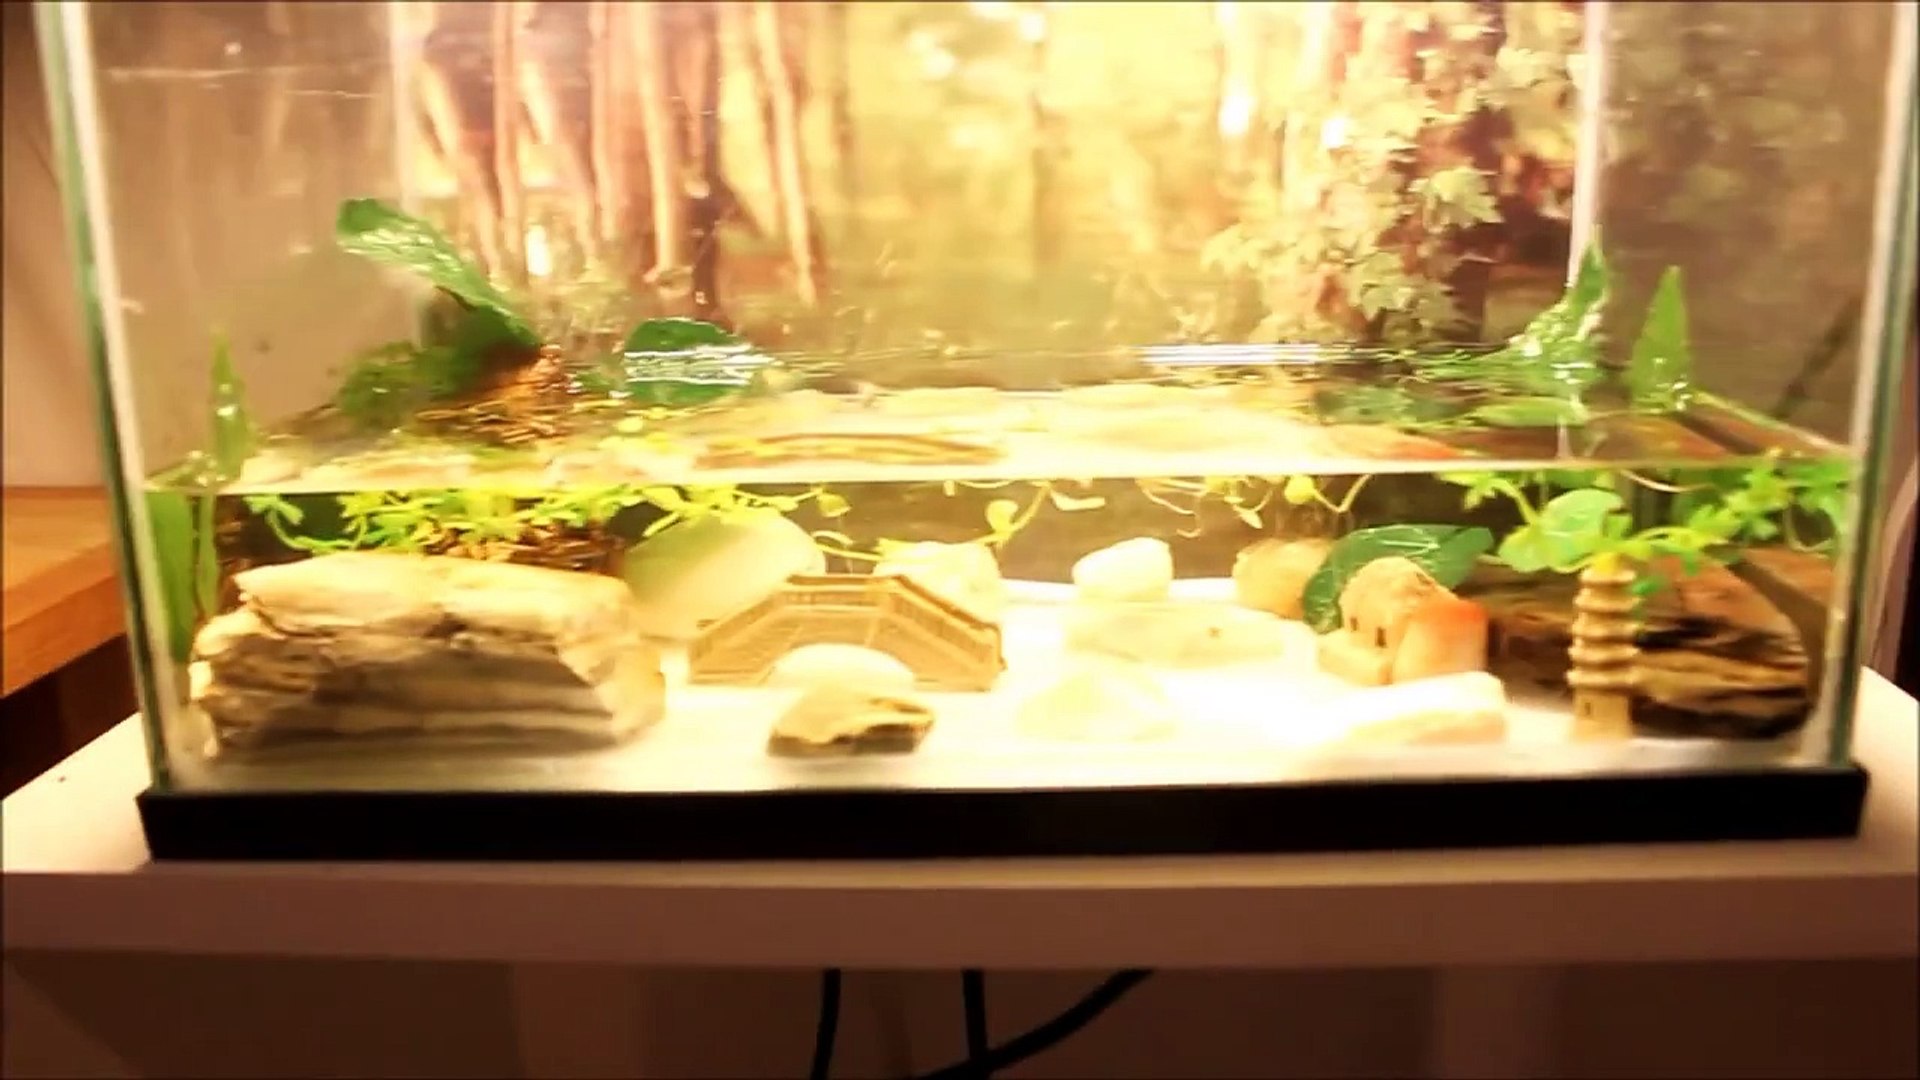 How to Setup a Fire Belly Newt Tank (Simple Method)